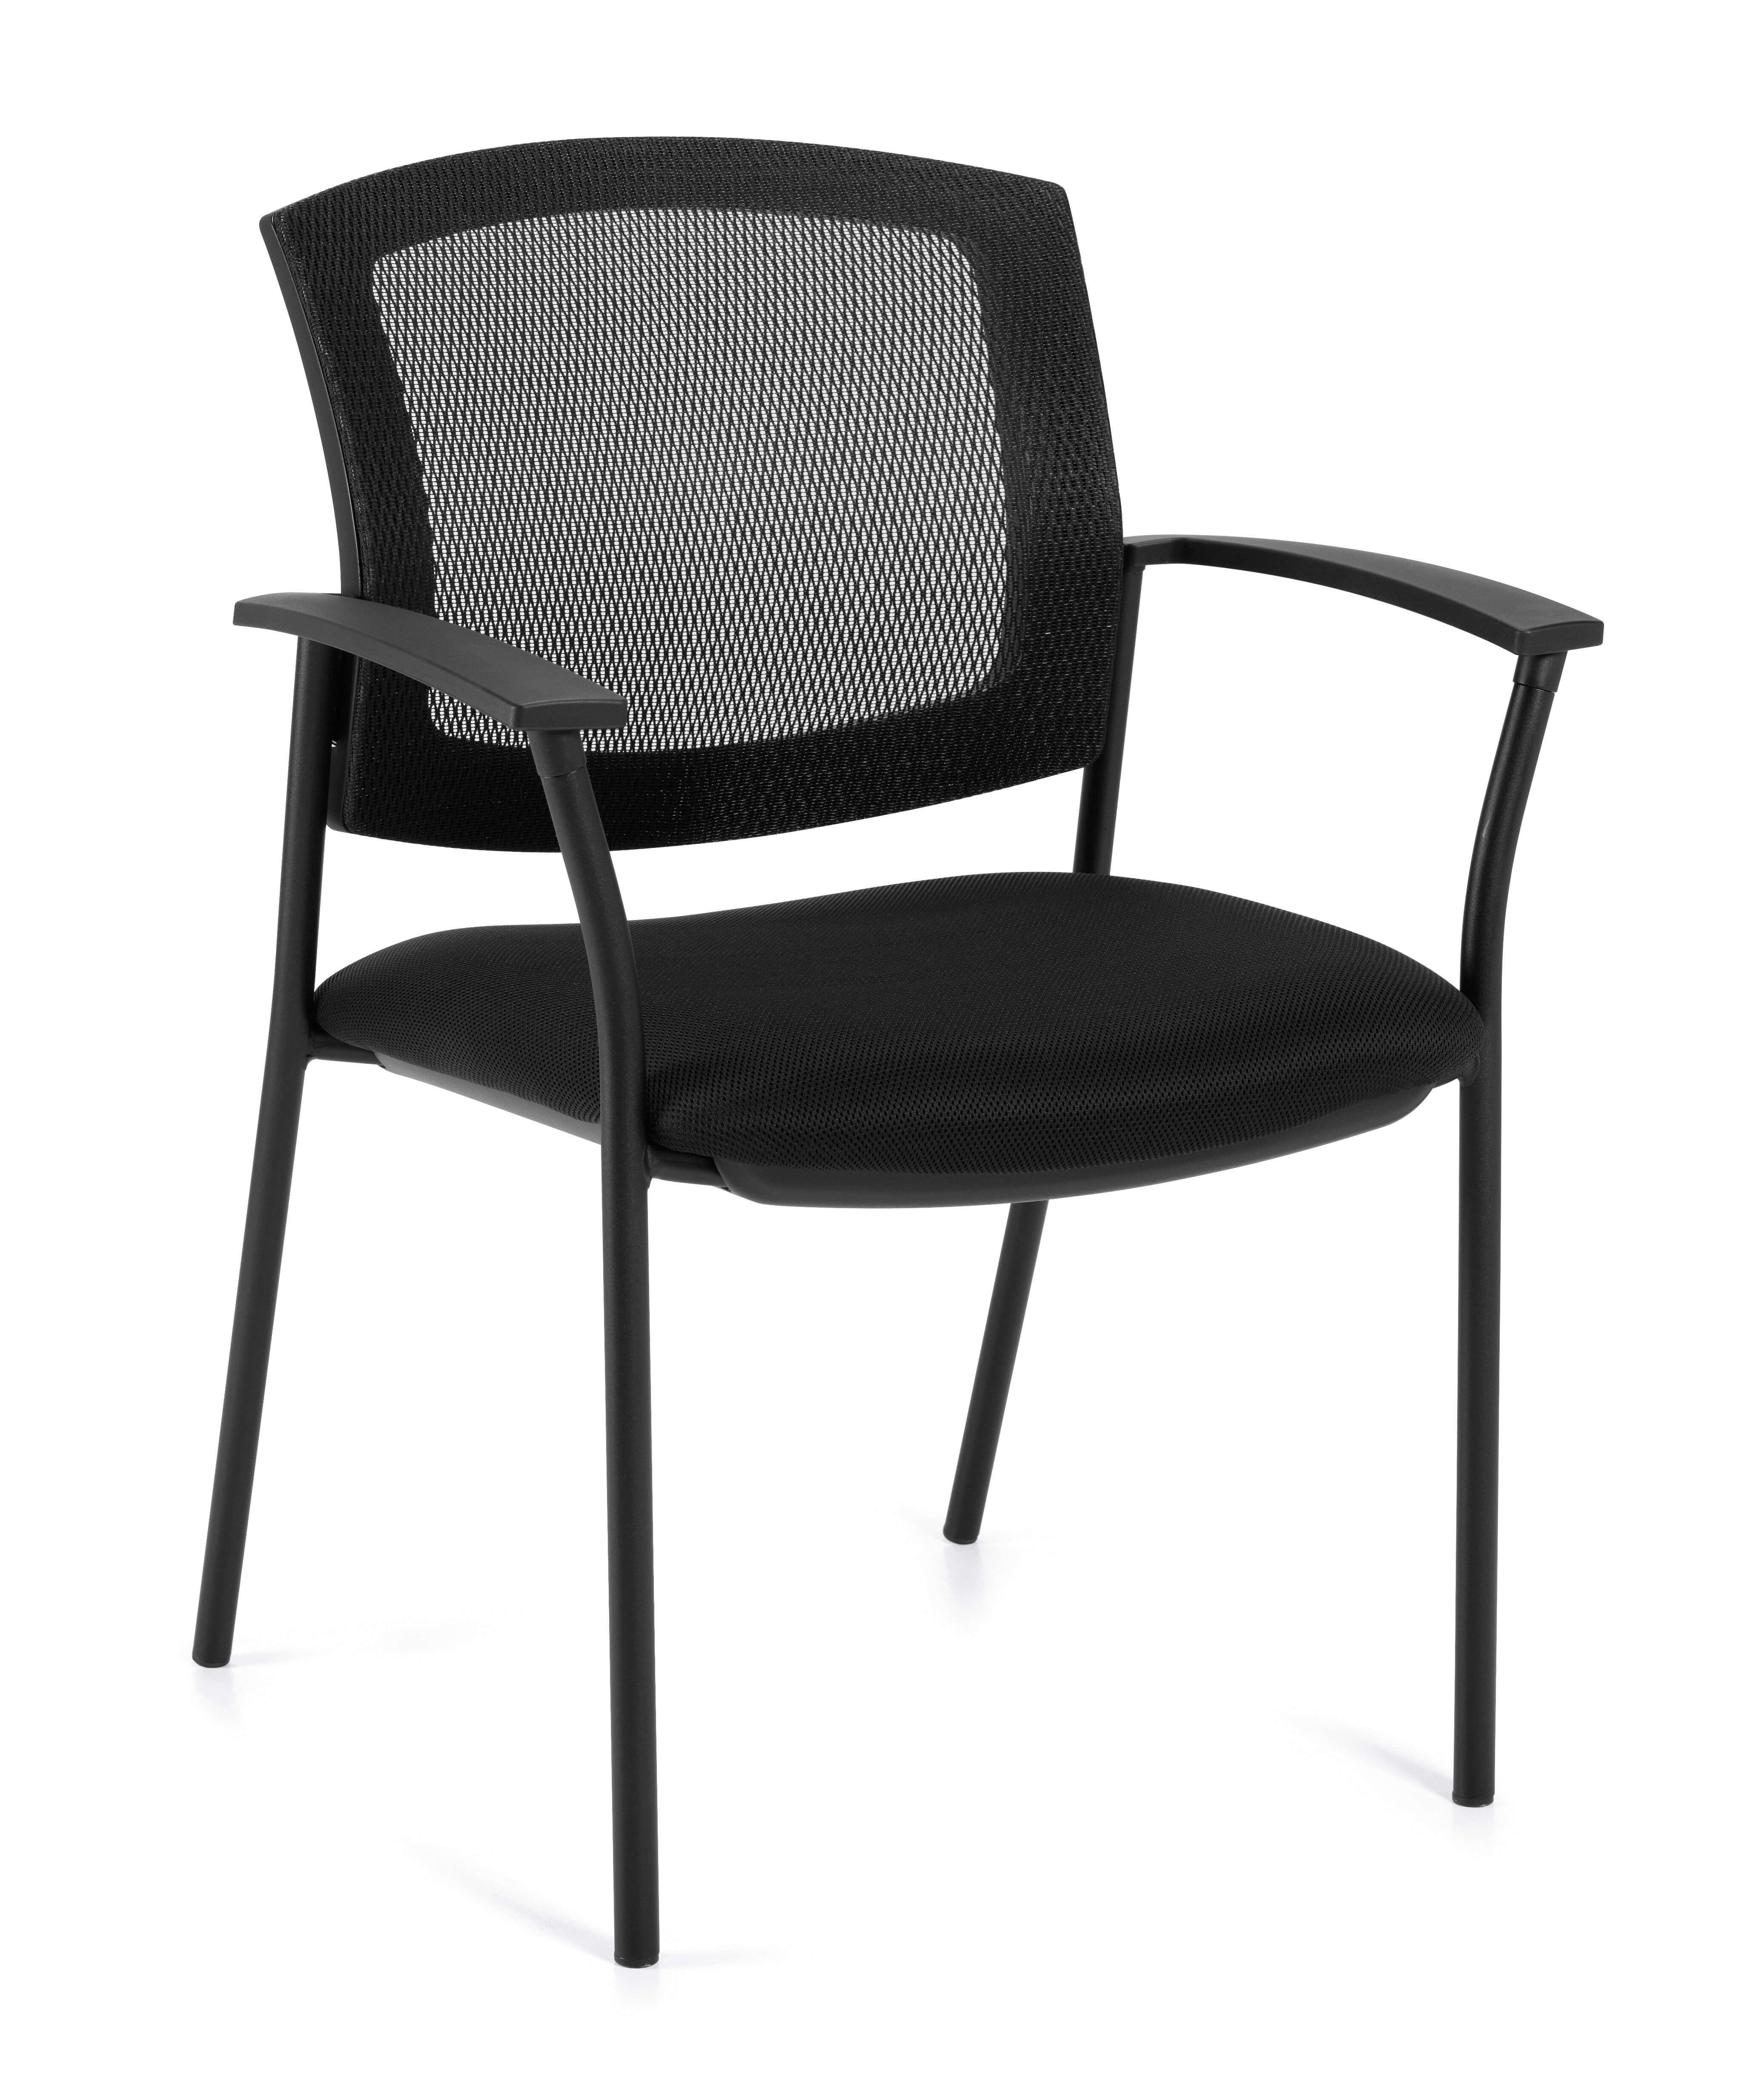 chairs-for-office-mesh-back-guest-chair.jpg